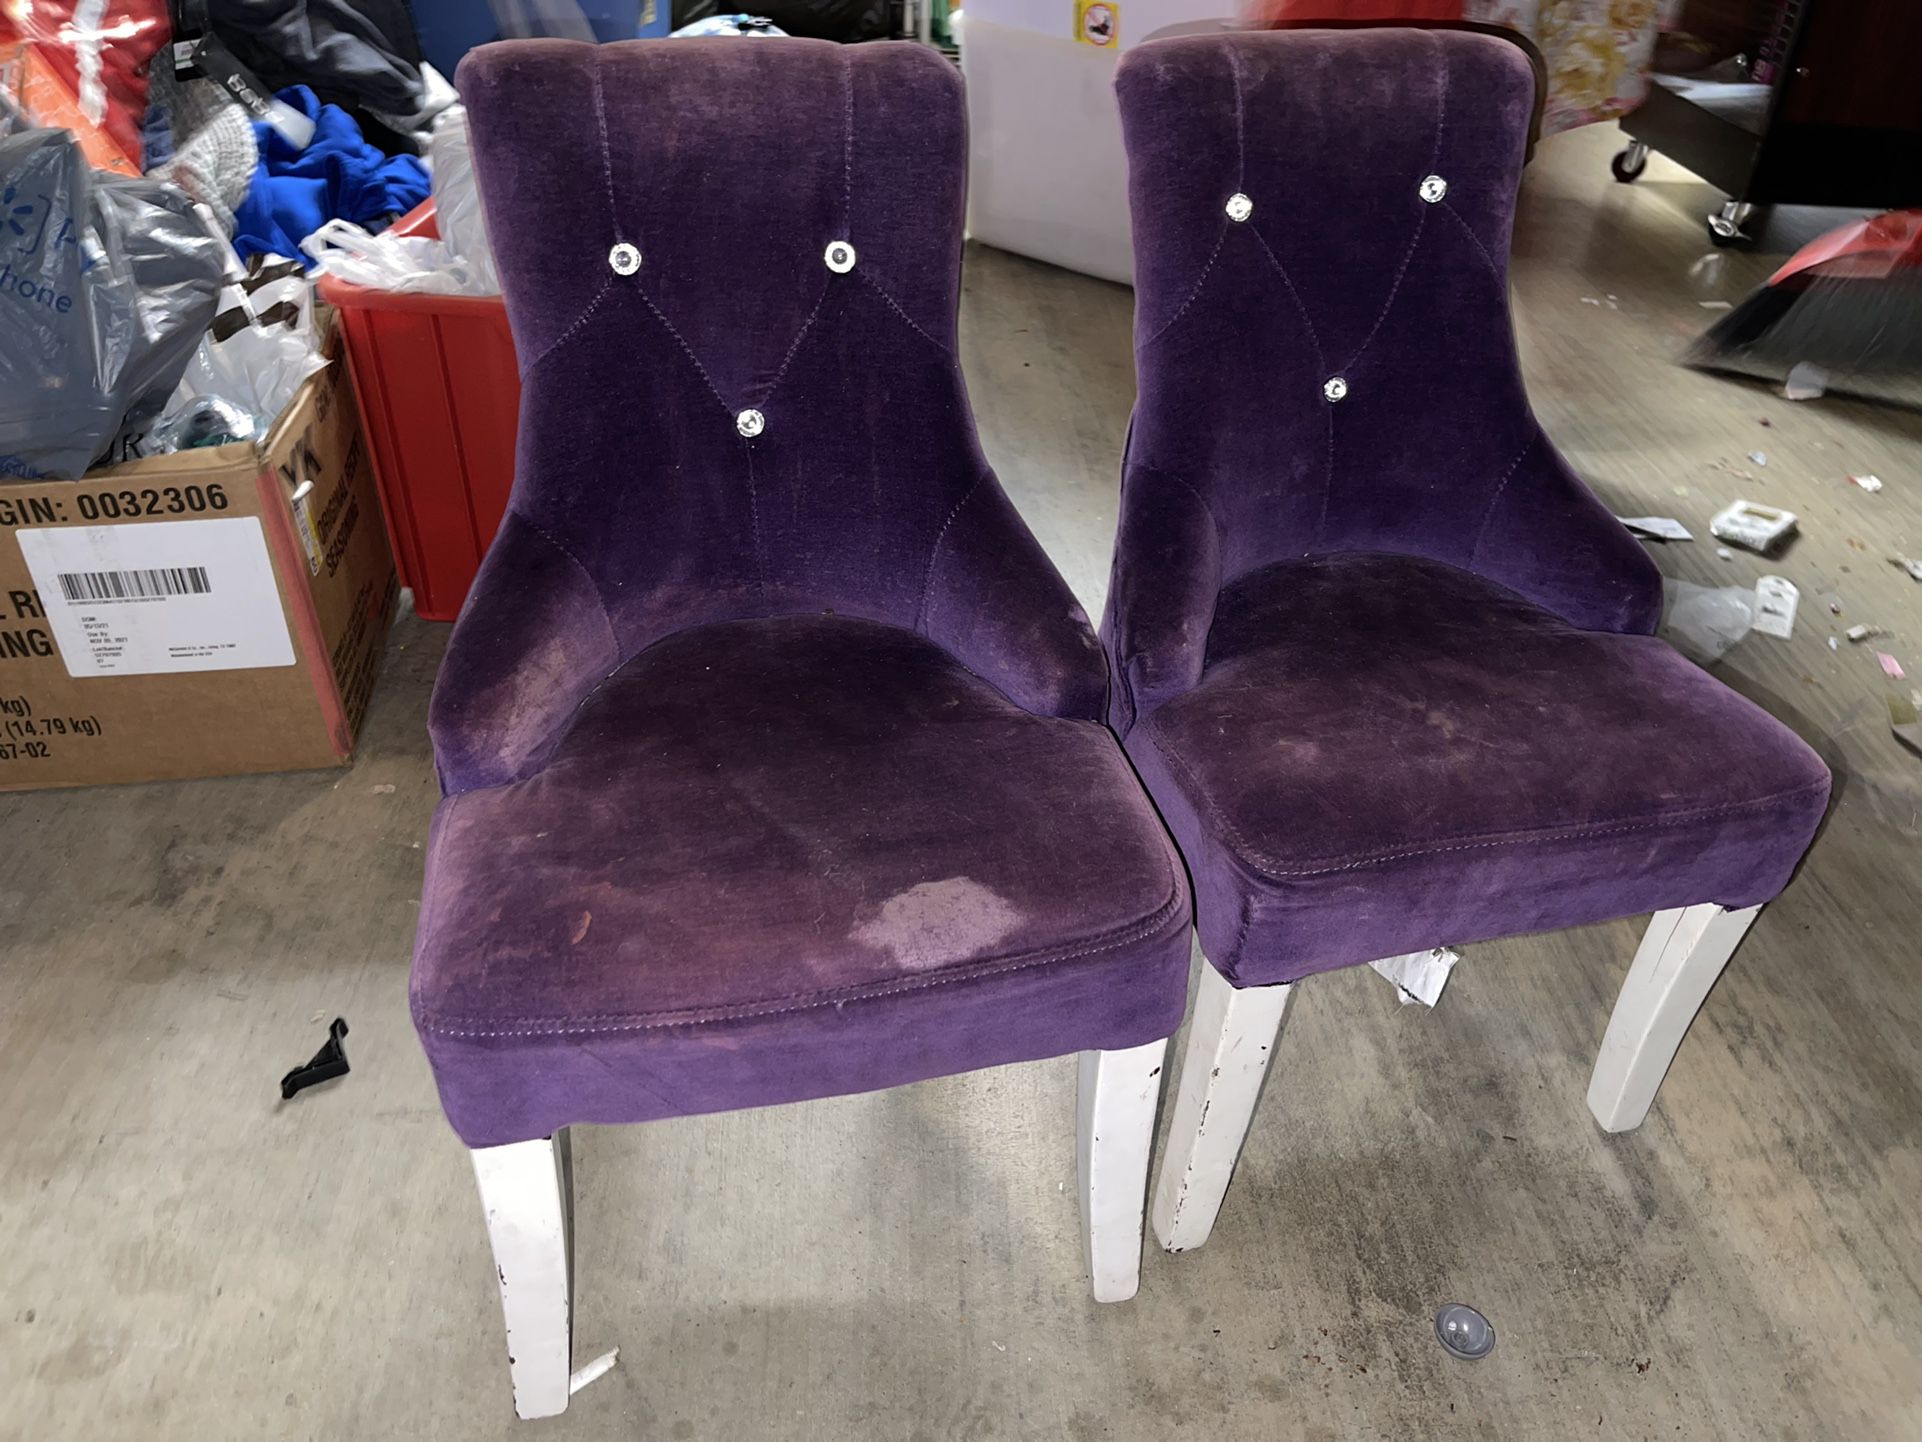 2 Kids Chairs For $10